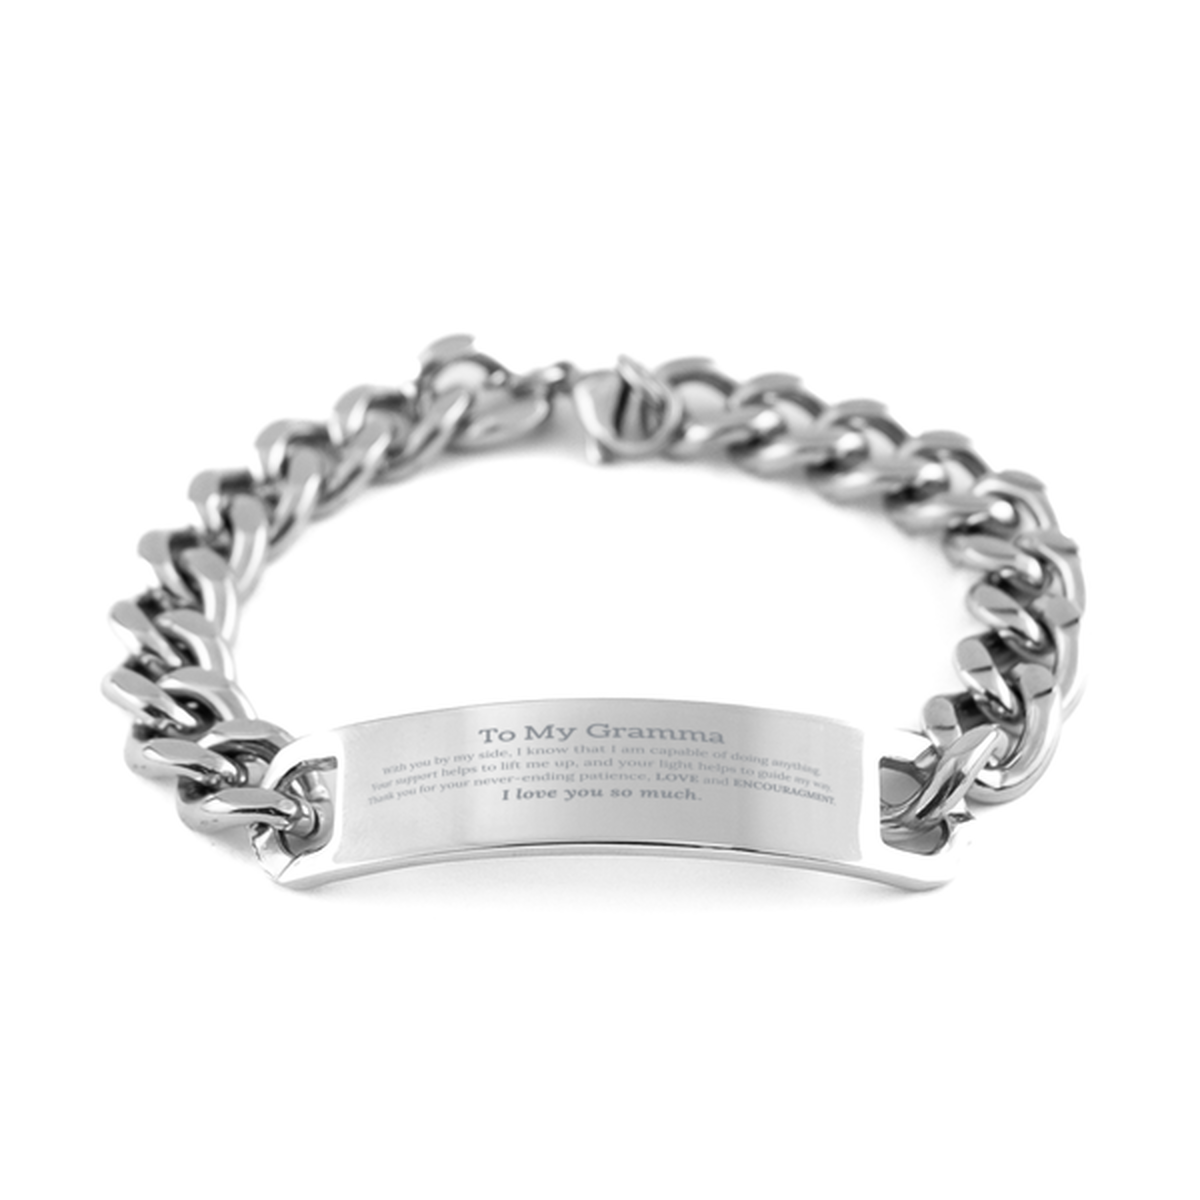 Appreciation Gramma Cuban Chain Stainless Steel Bracelet Gifts, To My Gramma Birthday Christmas Wedding Keepsake Gifts for Gramma With you by my side, I know that I am capable of doing anything. I love you so much